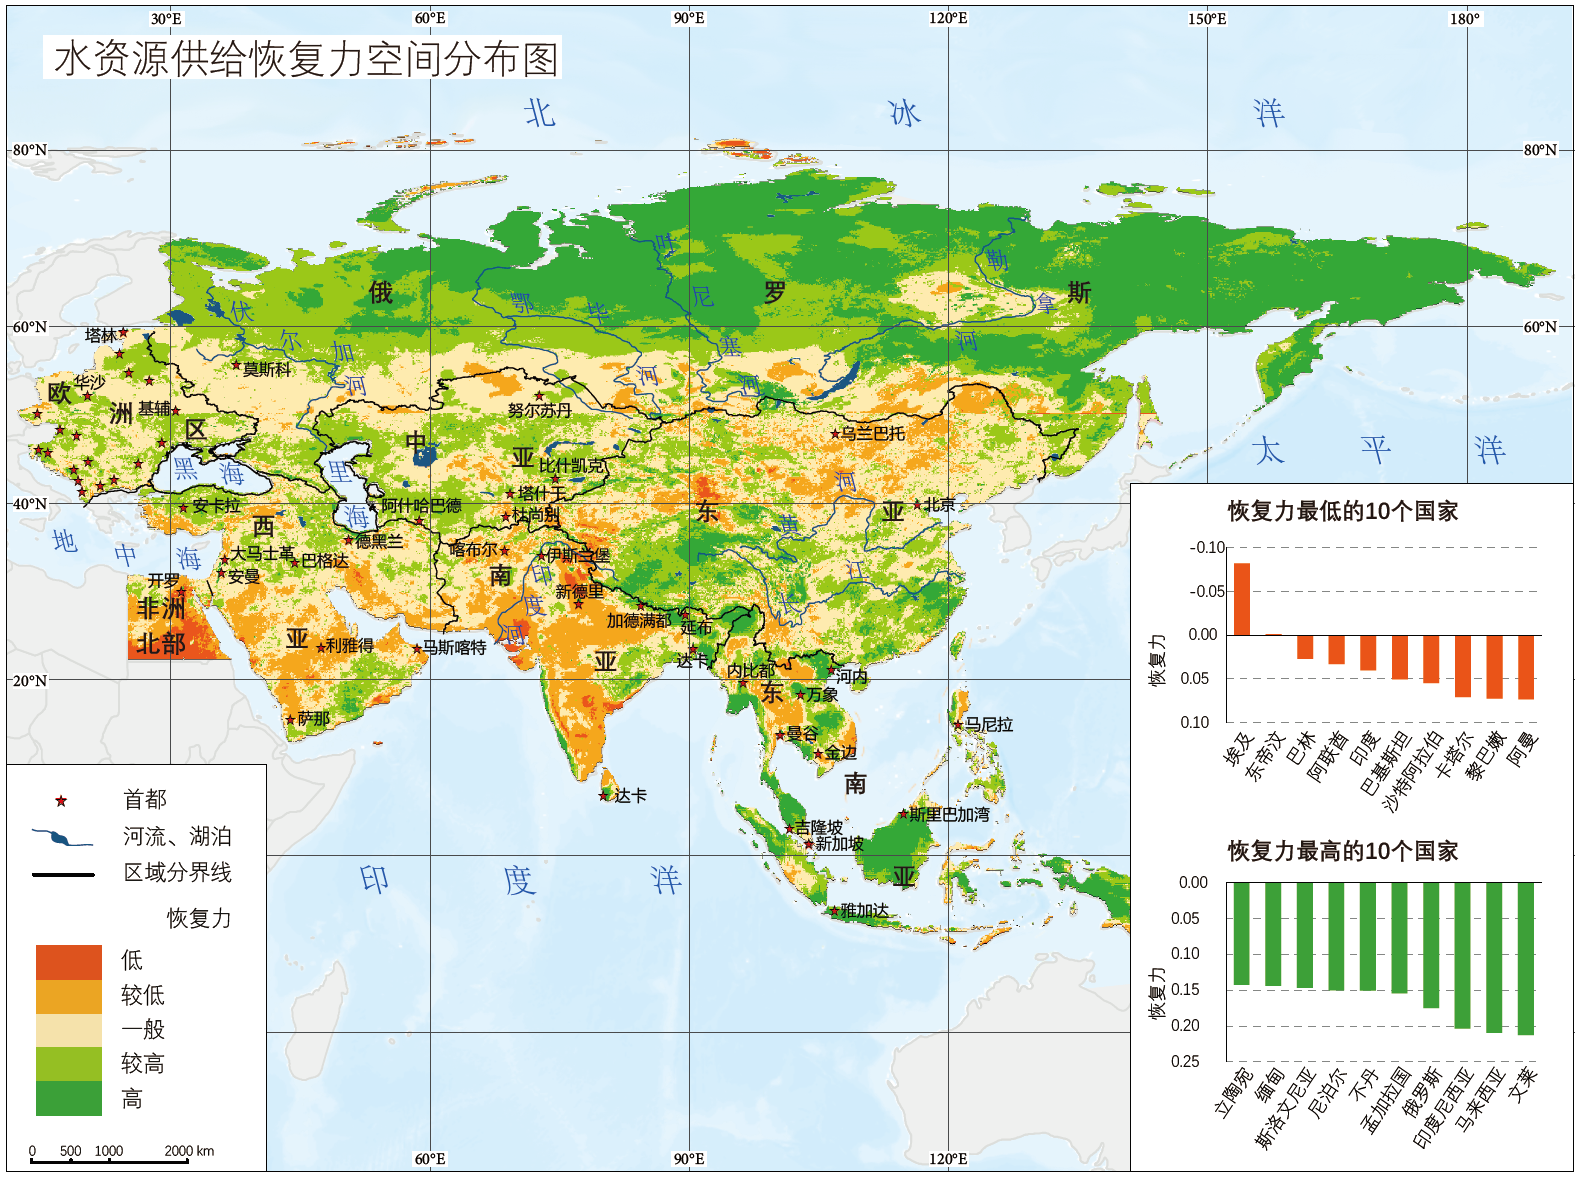 A dataset of water supply resilience in countries along the "Belt and Road" (2000-2019)